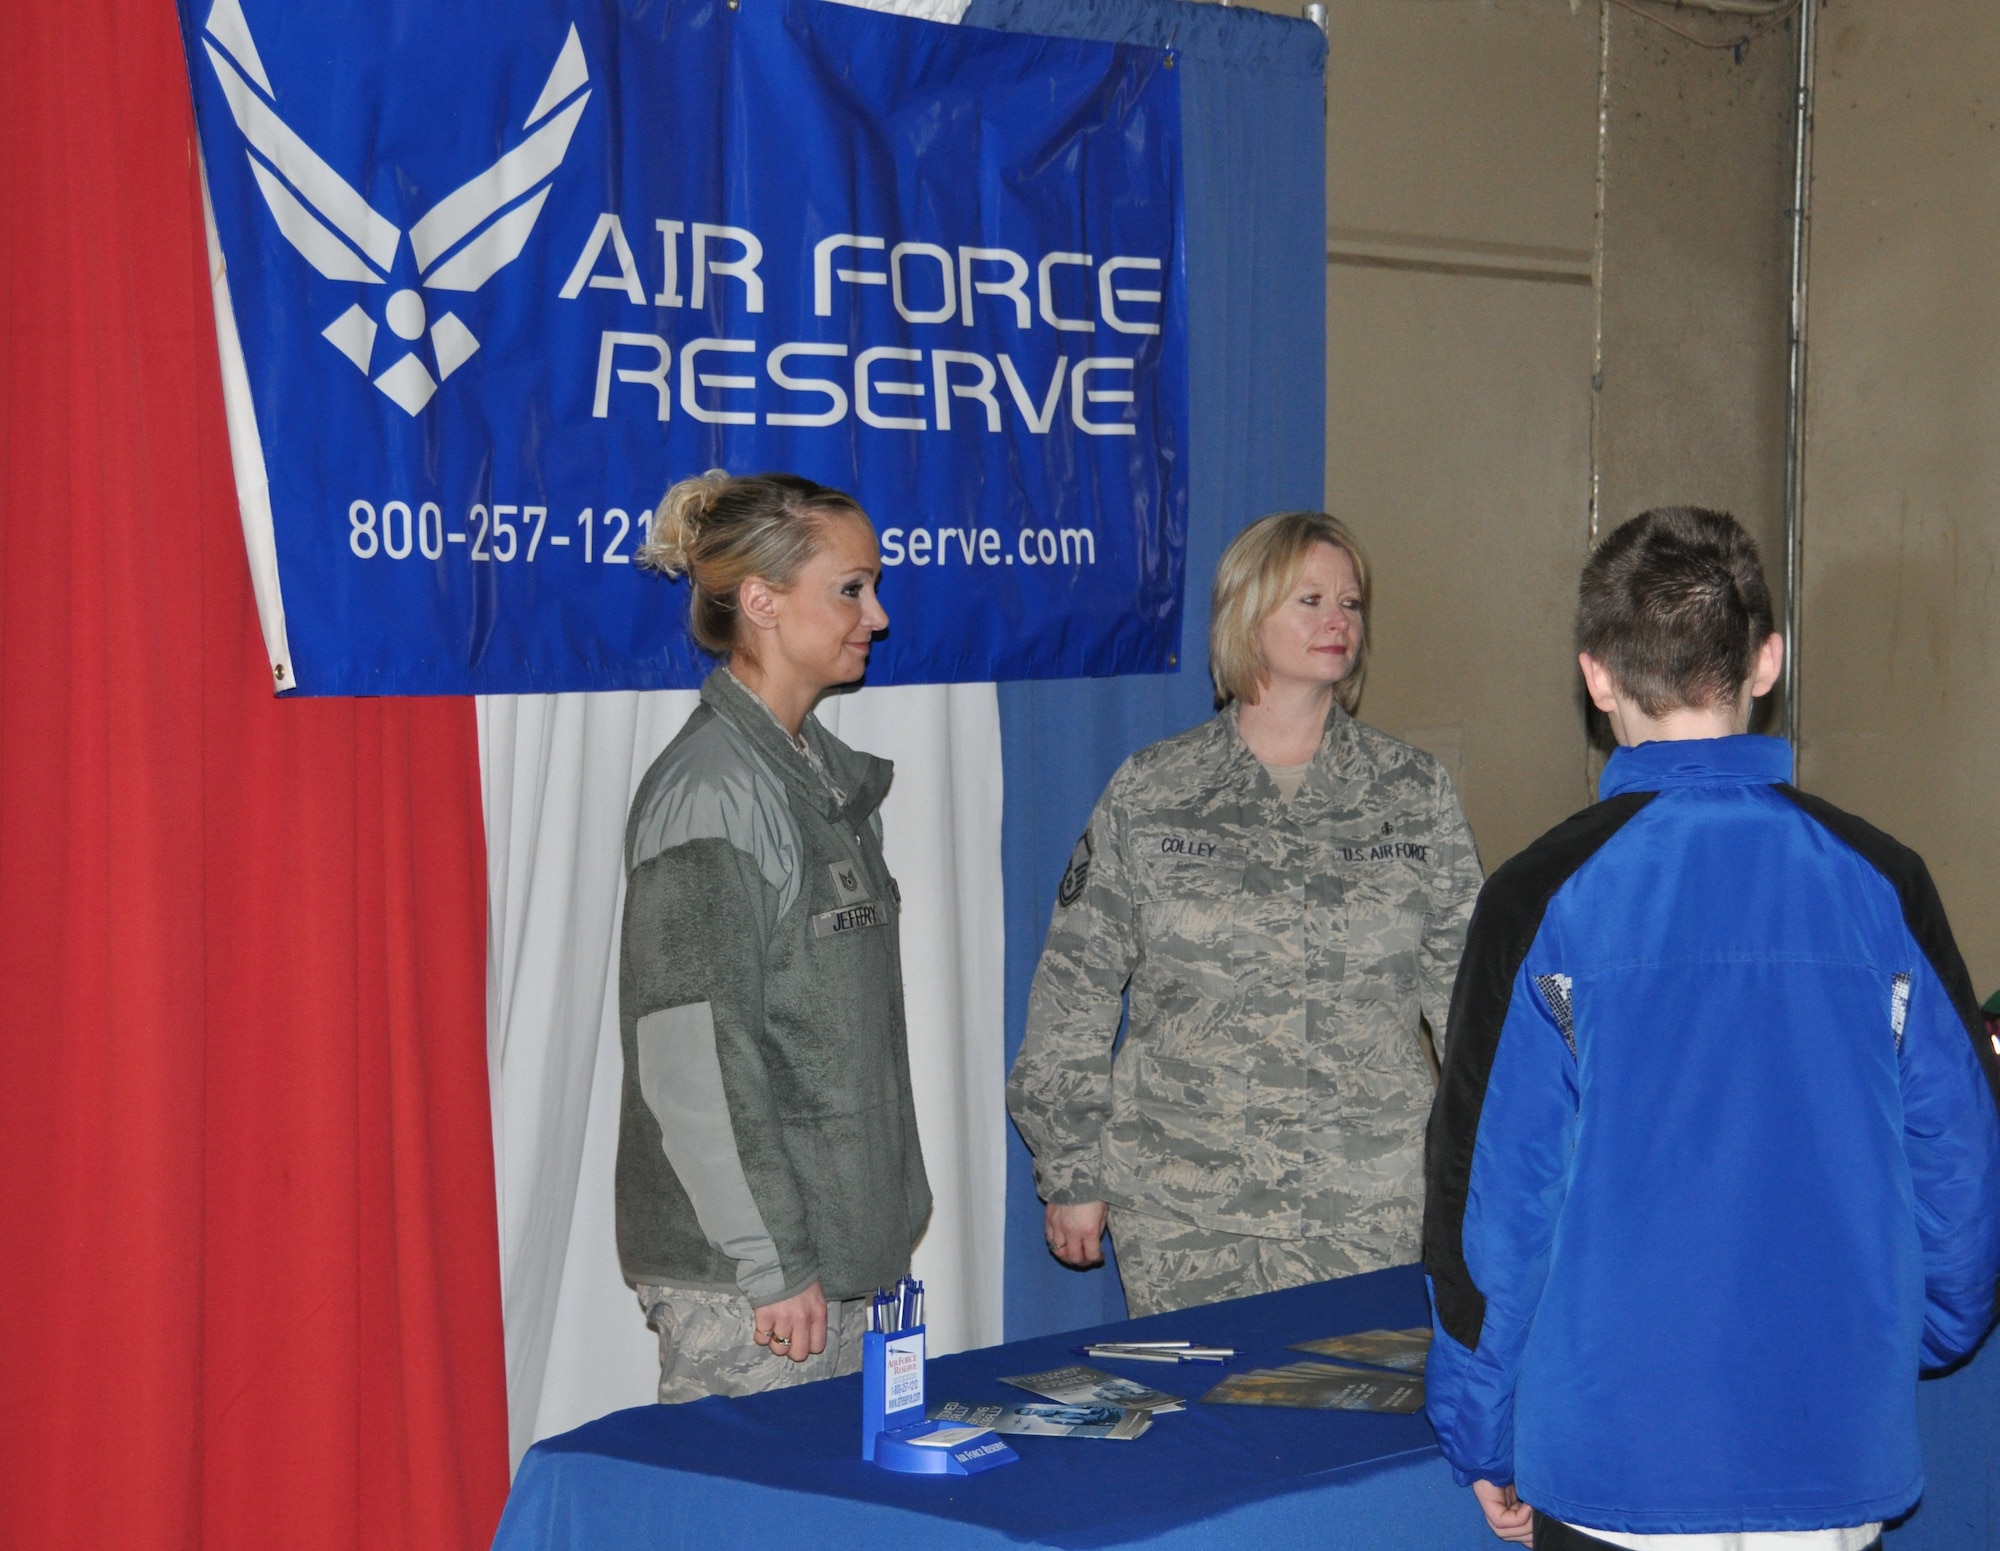 Tech. Sgt. Sammy Jeffery, an Air Force Reserve recruiter, and Master Sgt. Michelle Colley, 477th Aerospace Medicine Flight, discuss benefits of the Reserve with patrons at the Alaska Aces hockey game Feb. 9. The 477th FG has positions available for those who want to live in Alaska and serve their country.(U.S. Air Force Reserve photo/Tech. Sgt. Dana Rosso)